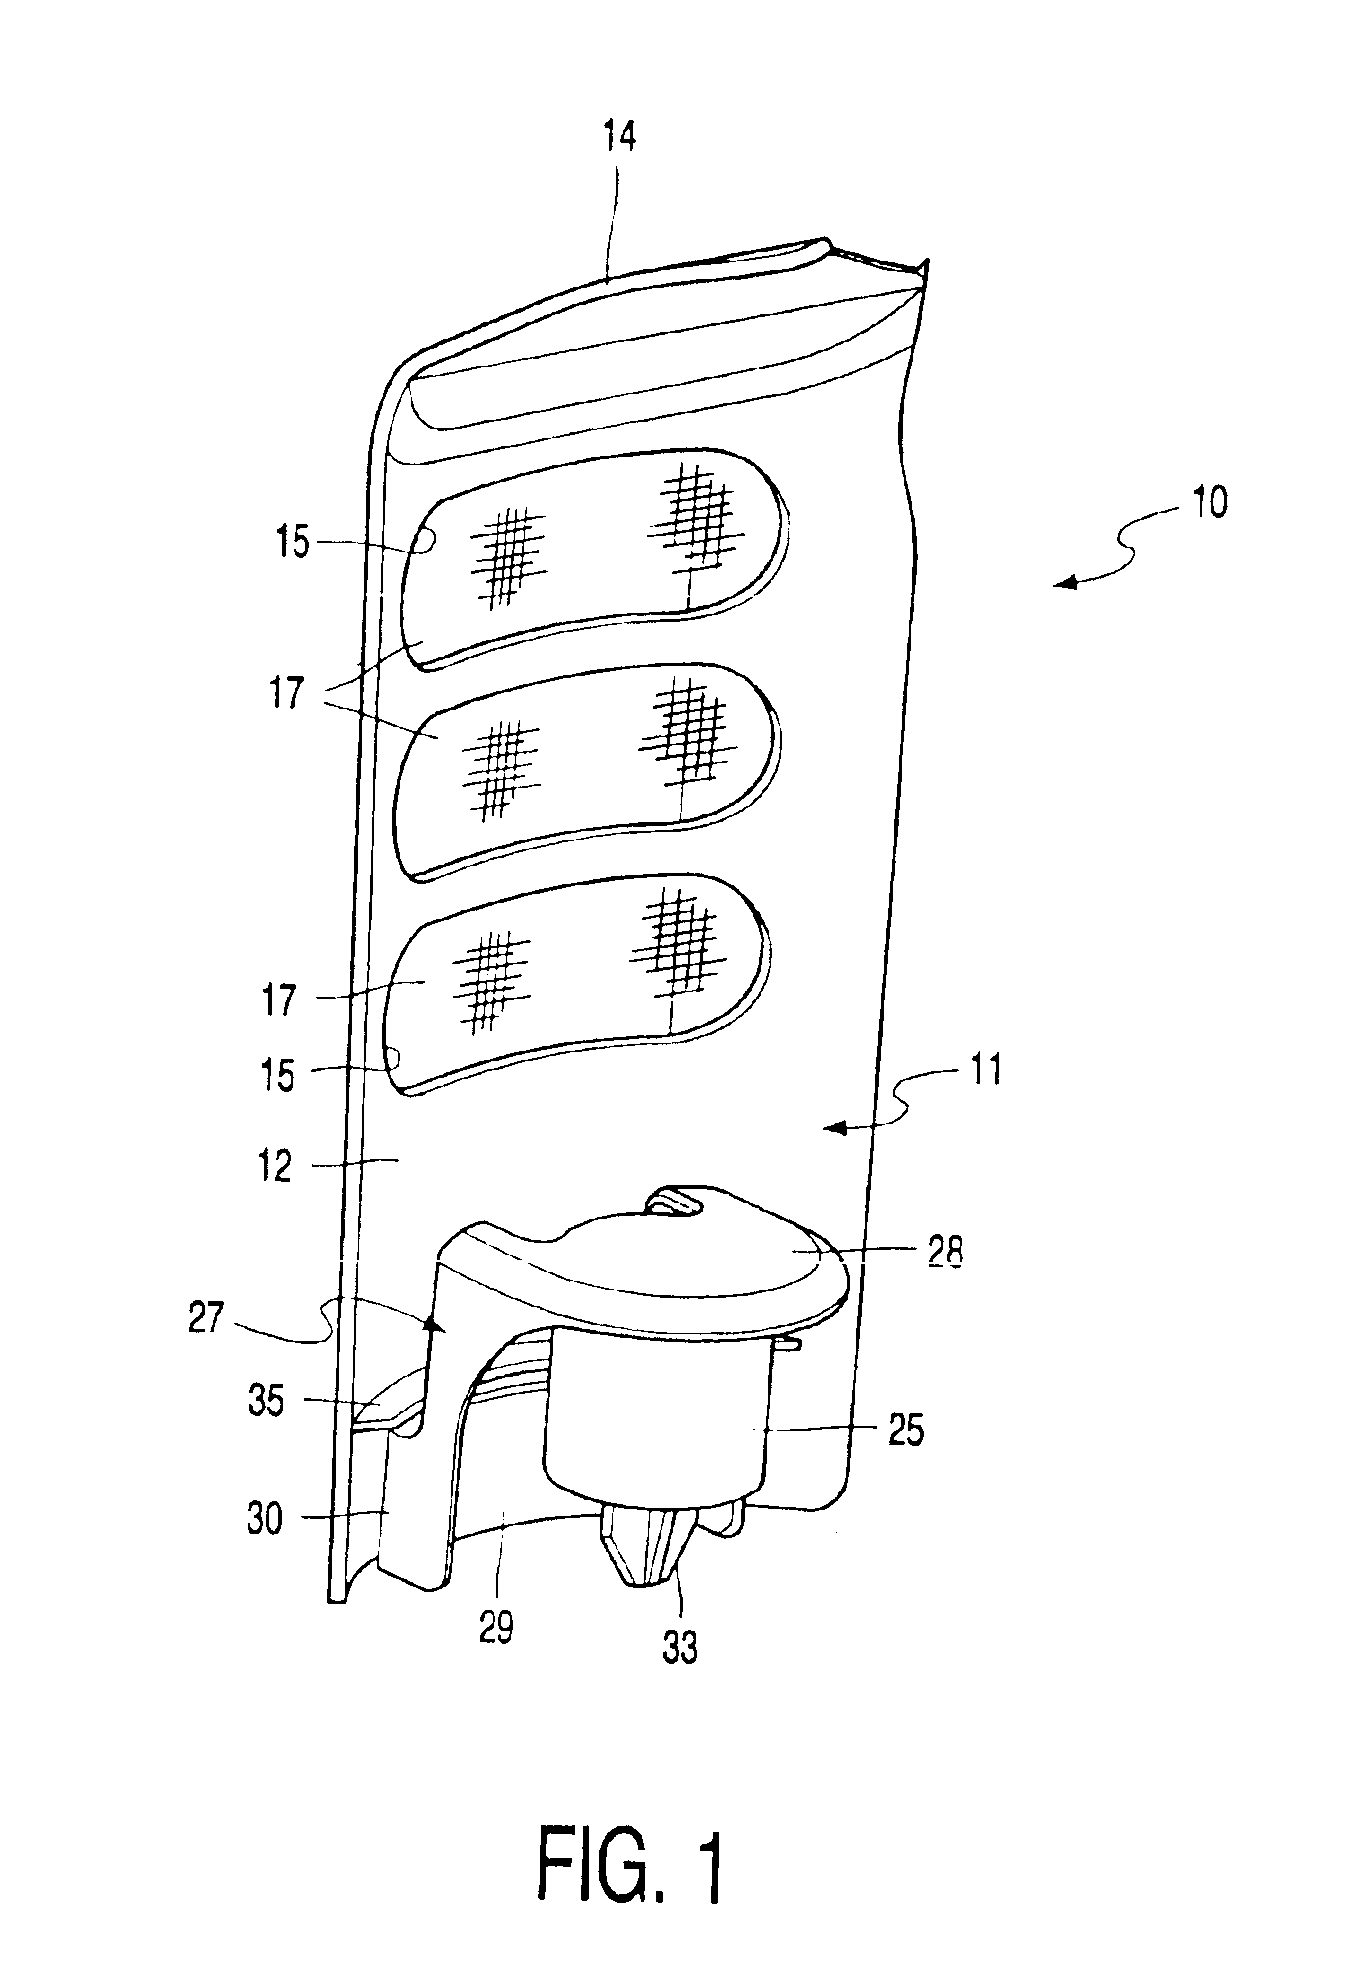 Removable filters and water heating vessels incorporating such